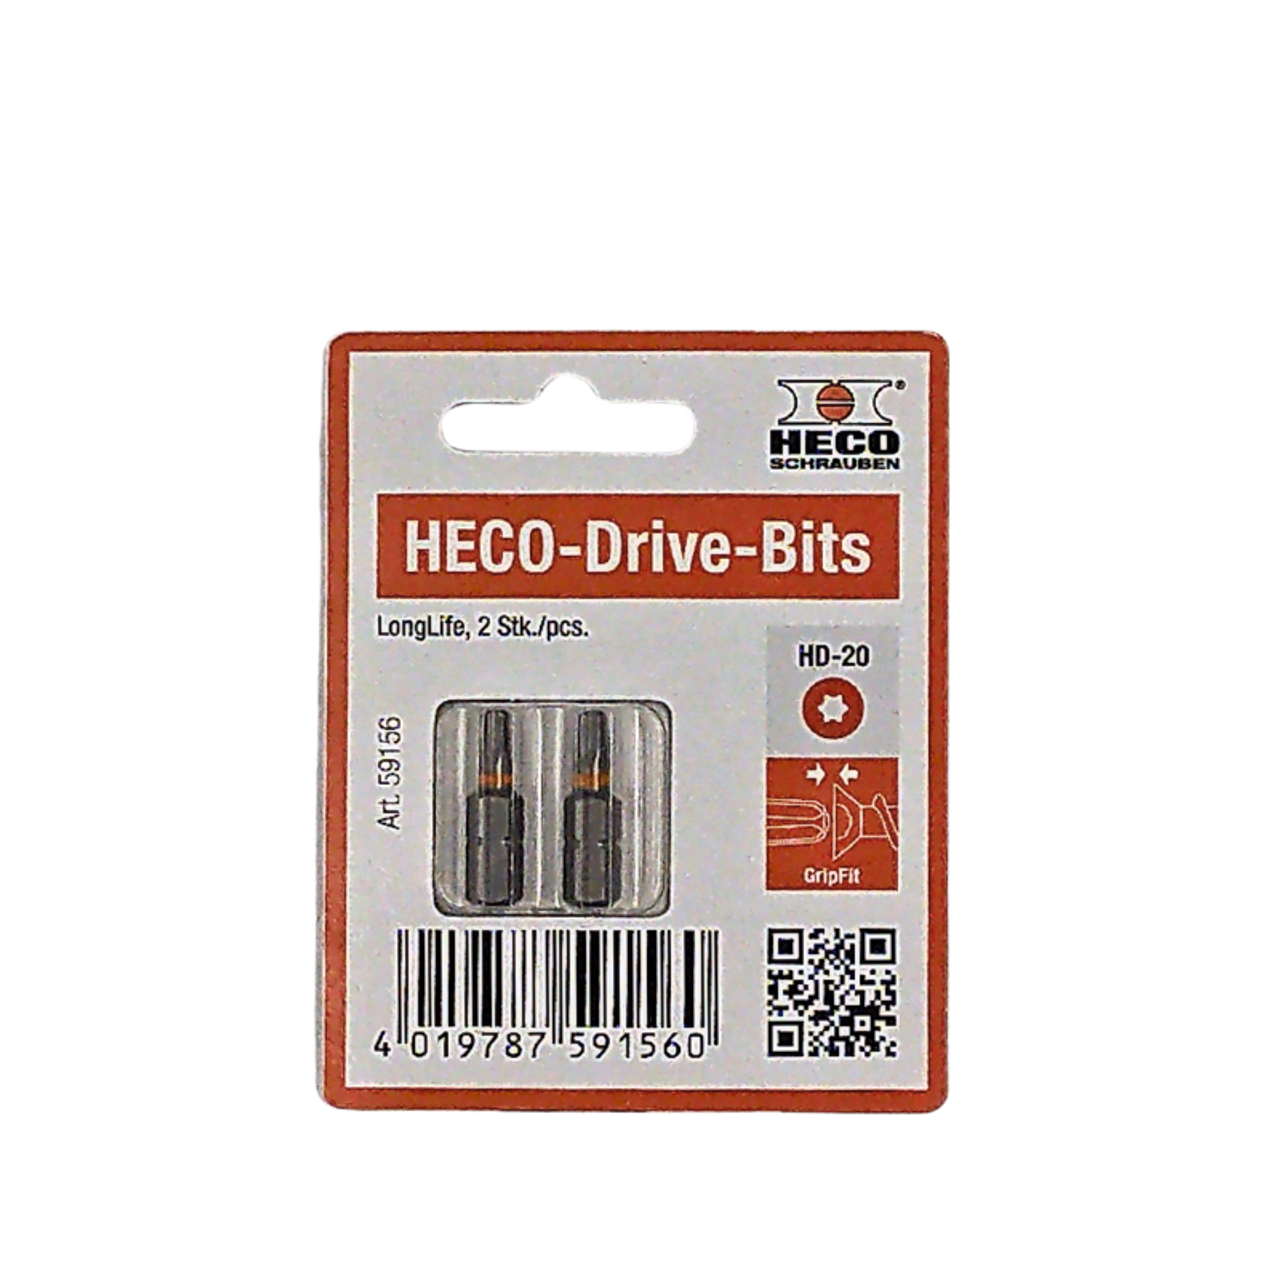 HECO Schrauben Drive Bits | Pack of 2 T20 / HD20 Drive Bits with Torx Drive for Deck Building, Carpentry in Melbourne, Sydney and Brisbane.